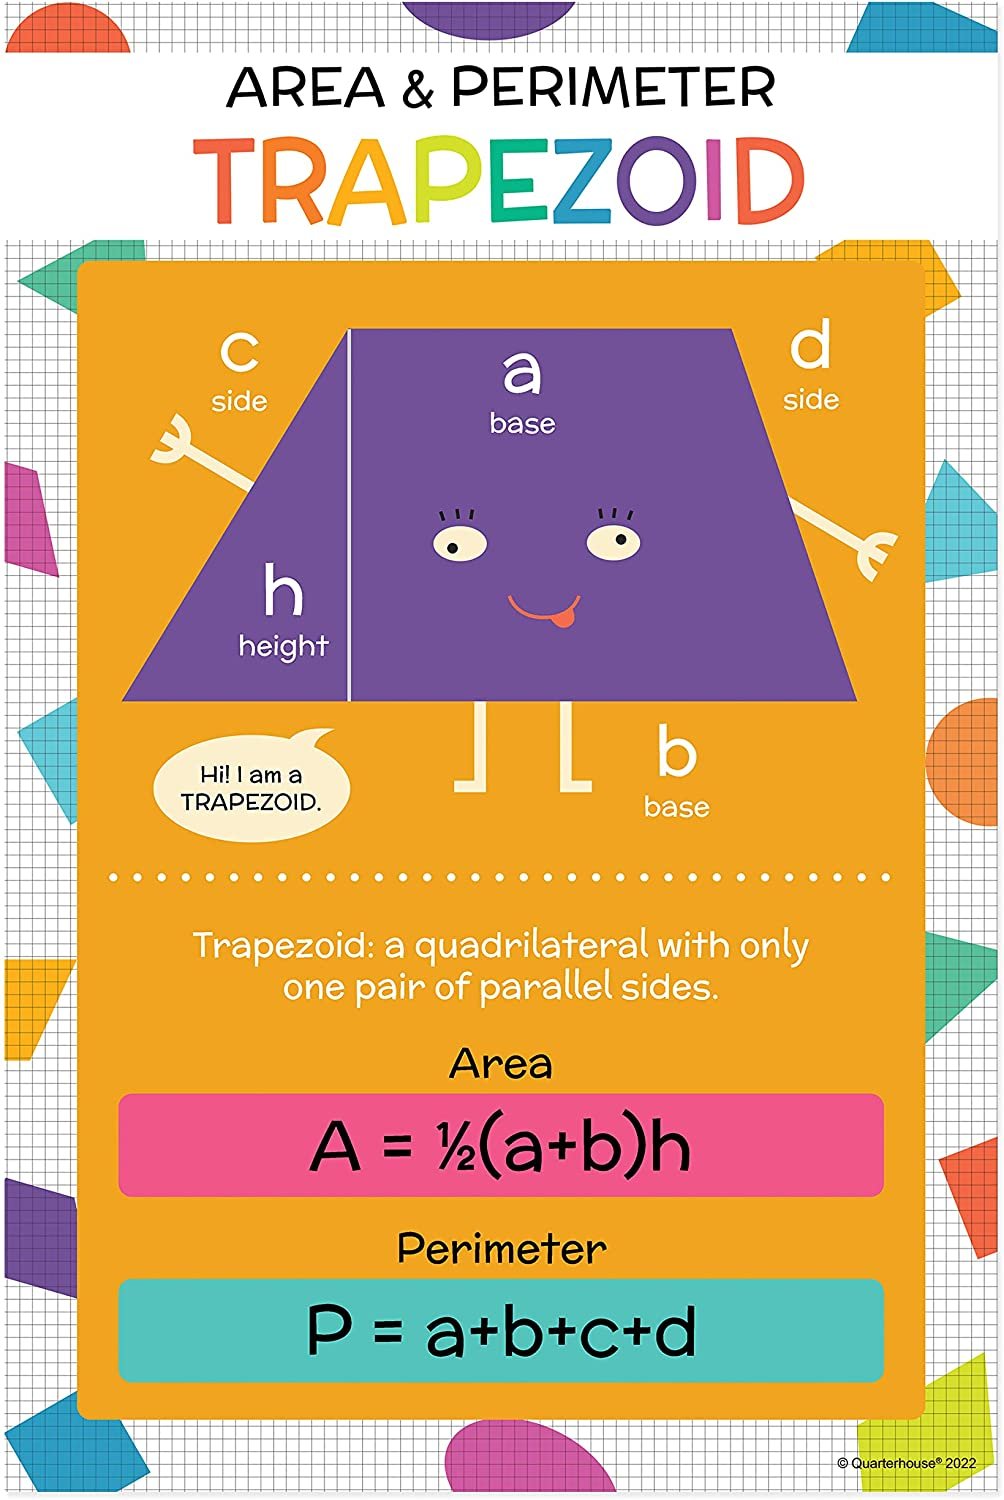 Quarterhouse Intro to Geometry - Shapes Poster Set, Math Classroom Learning Materials for K-12 Students and Teachers, Set of 6, 12 x 18 Inches, Extra Durable